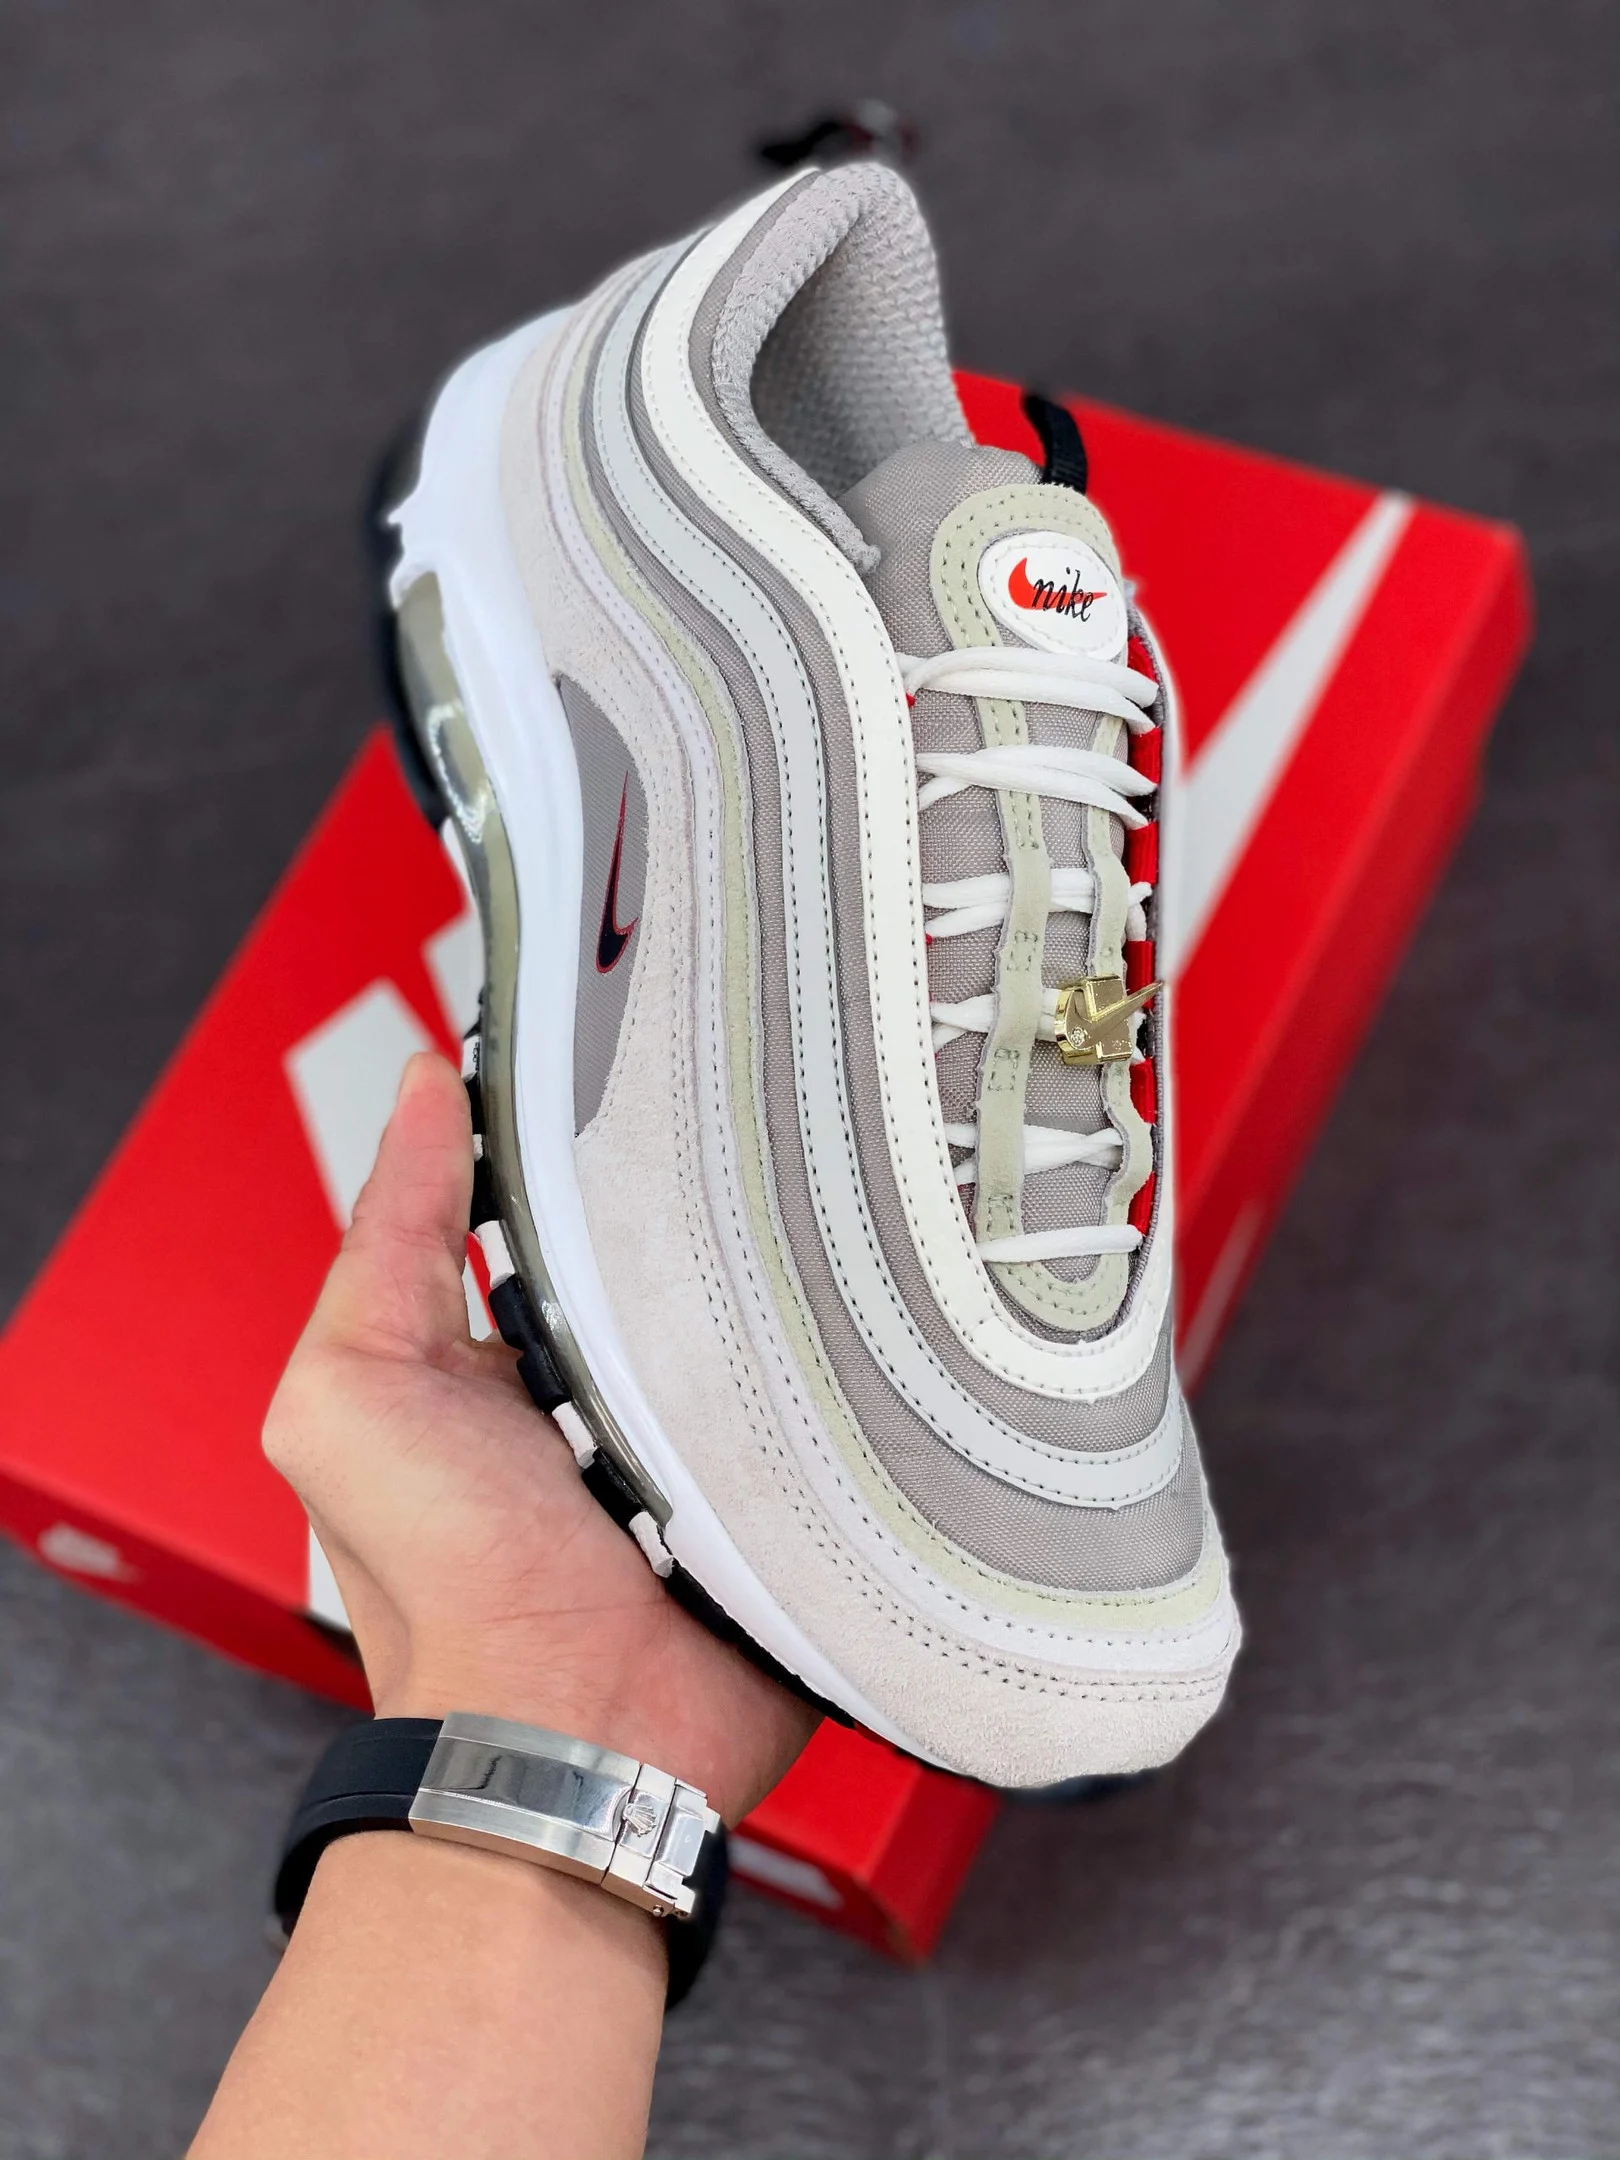 Nike Air Max 97 First Use DB0246-001 For Sale